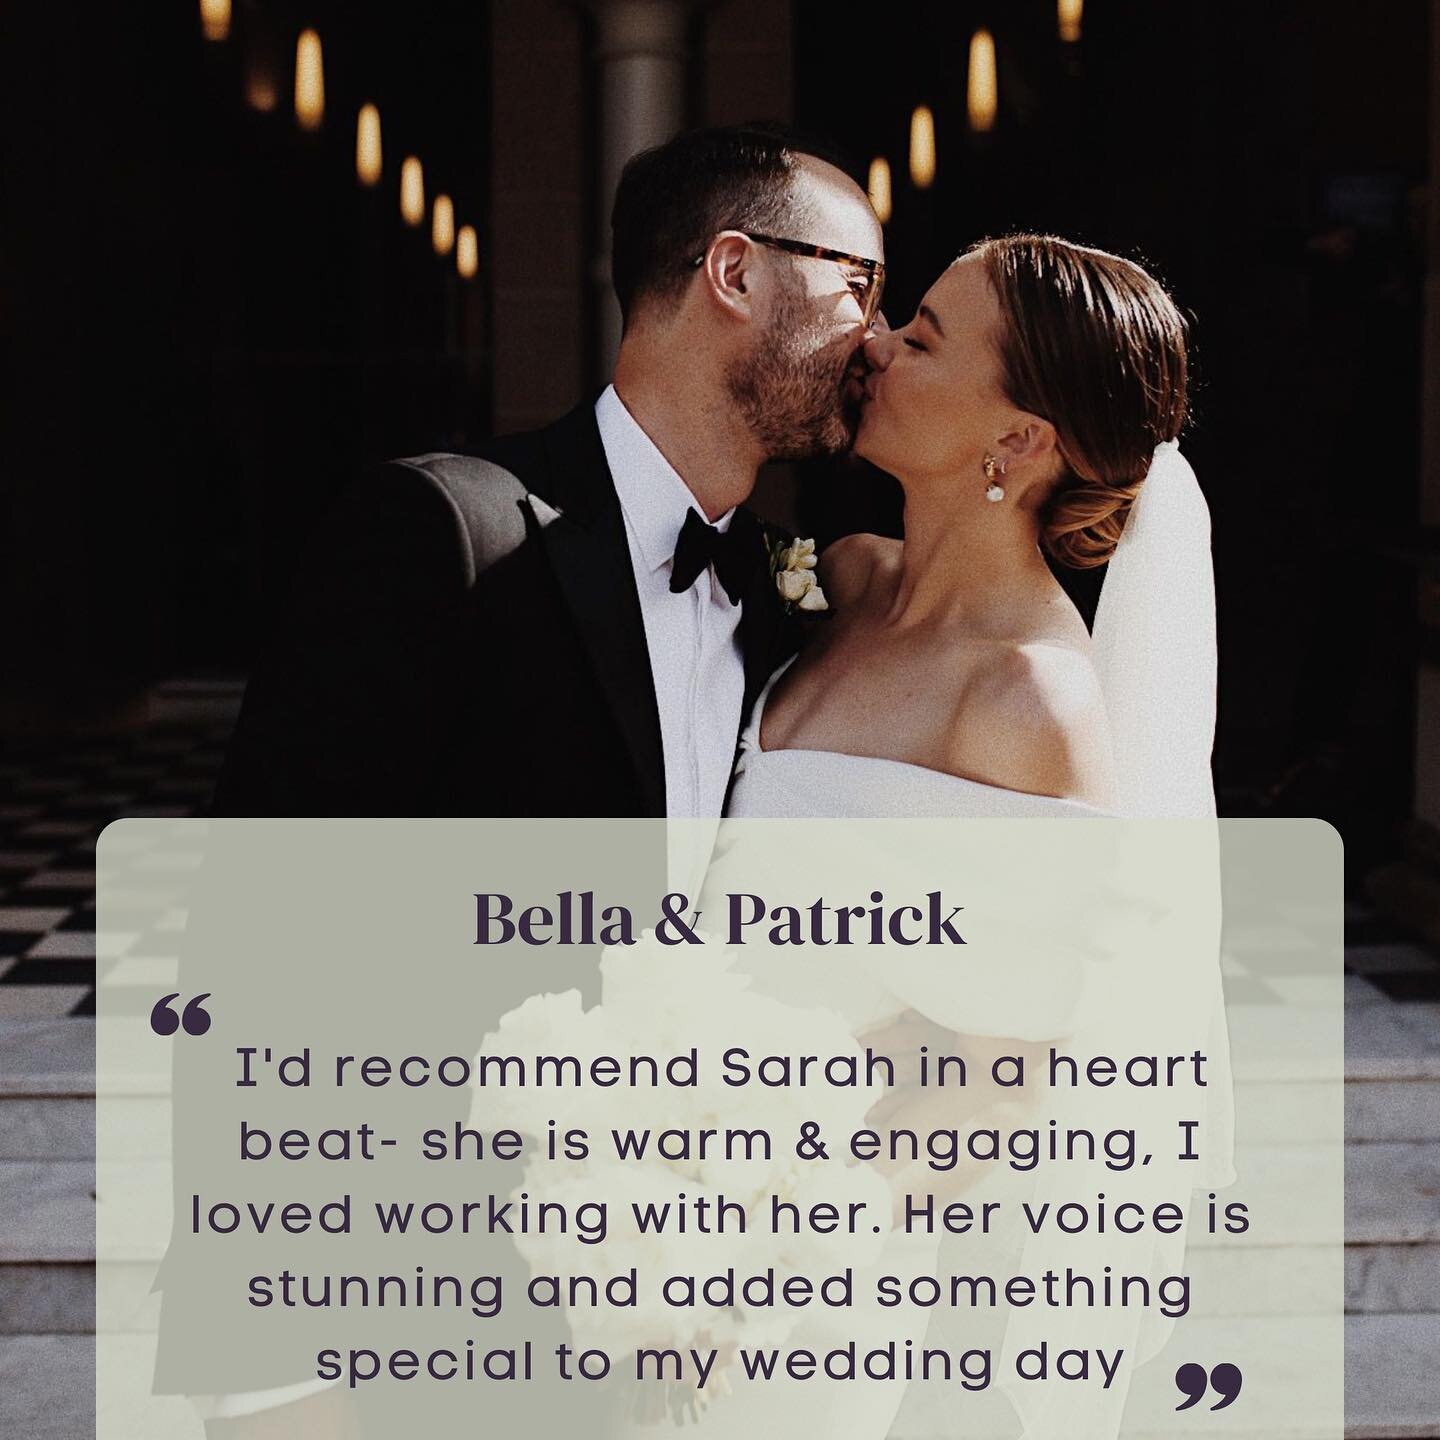 Bella &amp; Patrick 💜
.
Her name says it all, a beautiful wedding for a beautiful couple. Thank you for allowing me to share in your special day. 
.
Ps: how magnificent are these photos by @alexcarlyle 📸
.
.
.
.
.
.
#sydneywedding #weddingmusic #th